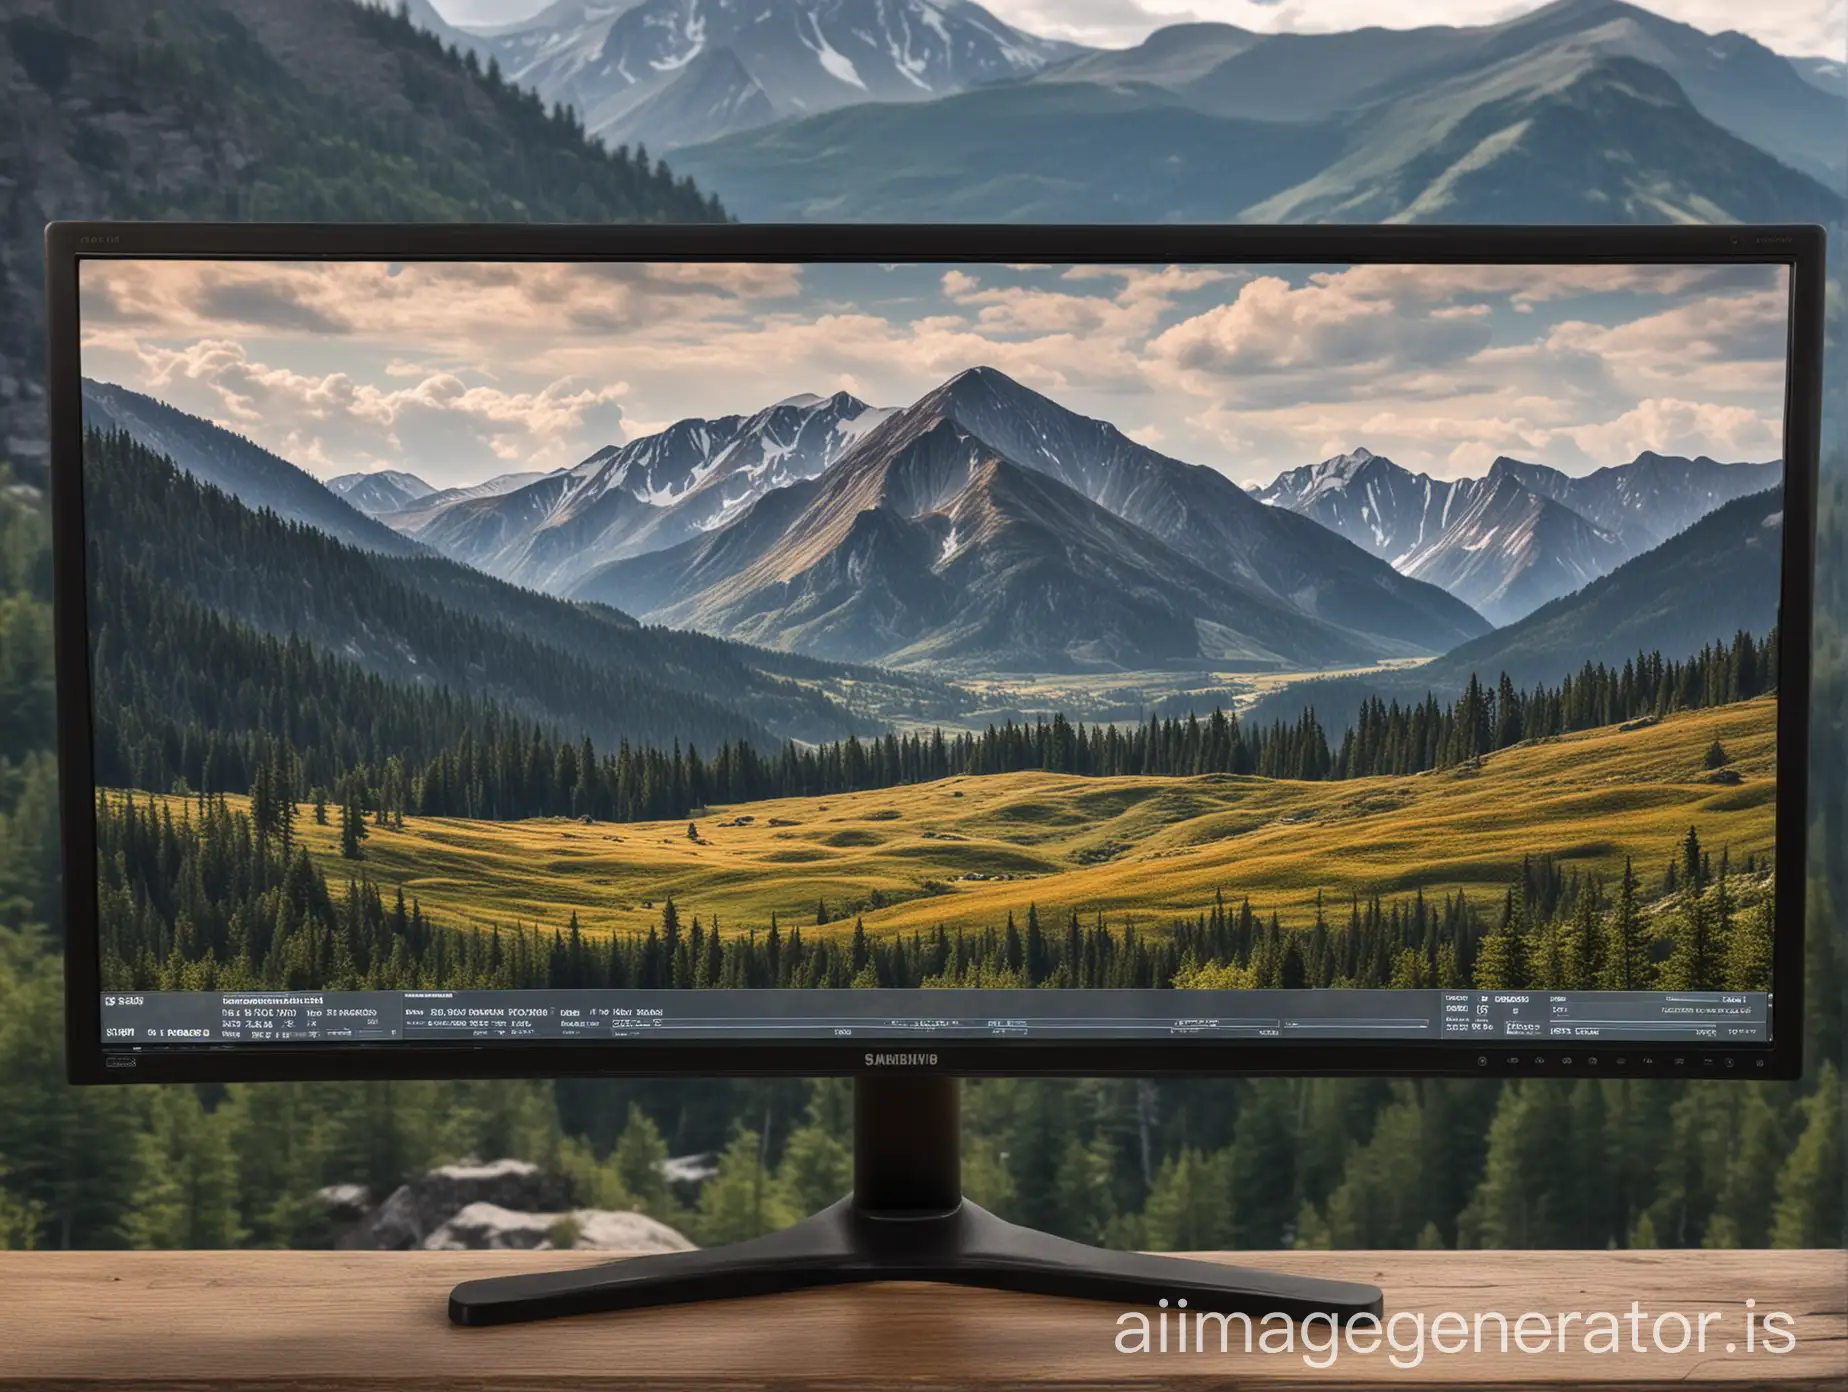 Samsung-Monitor-with-Mountain-Landscape-Background